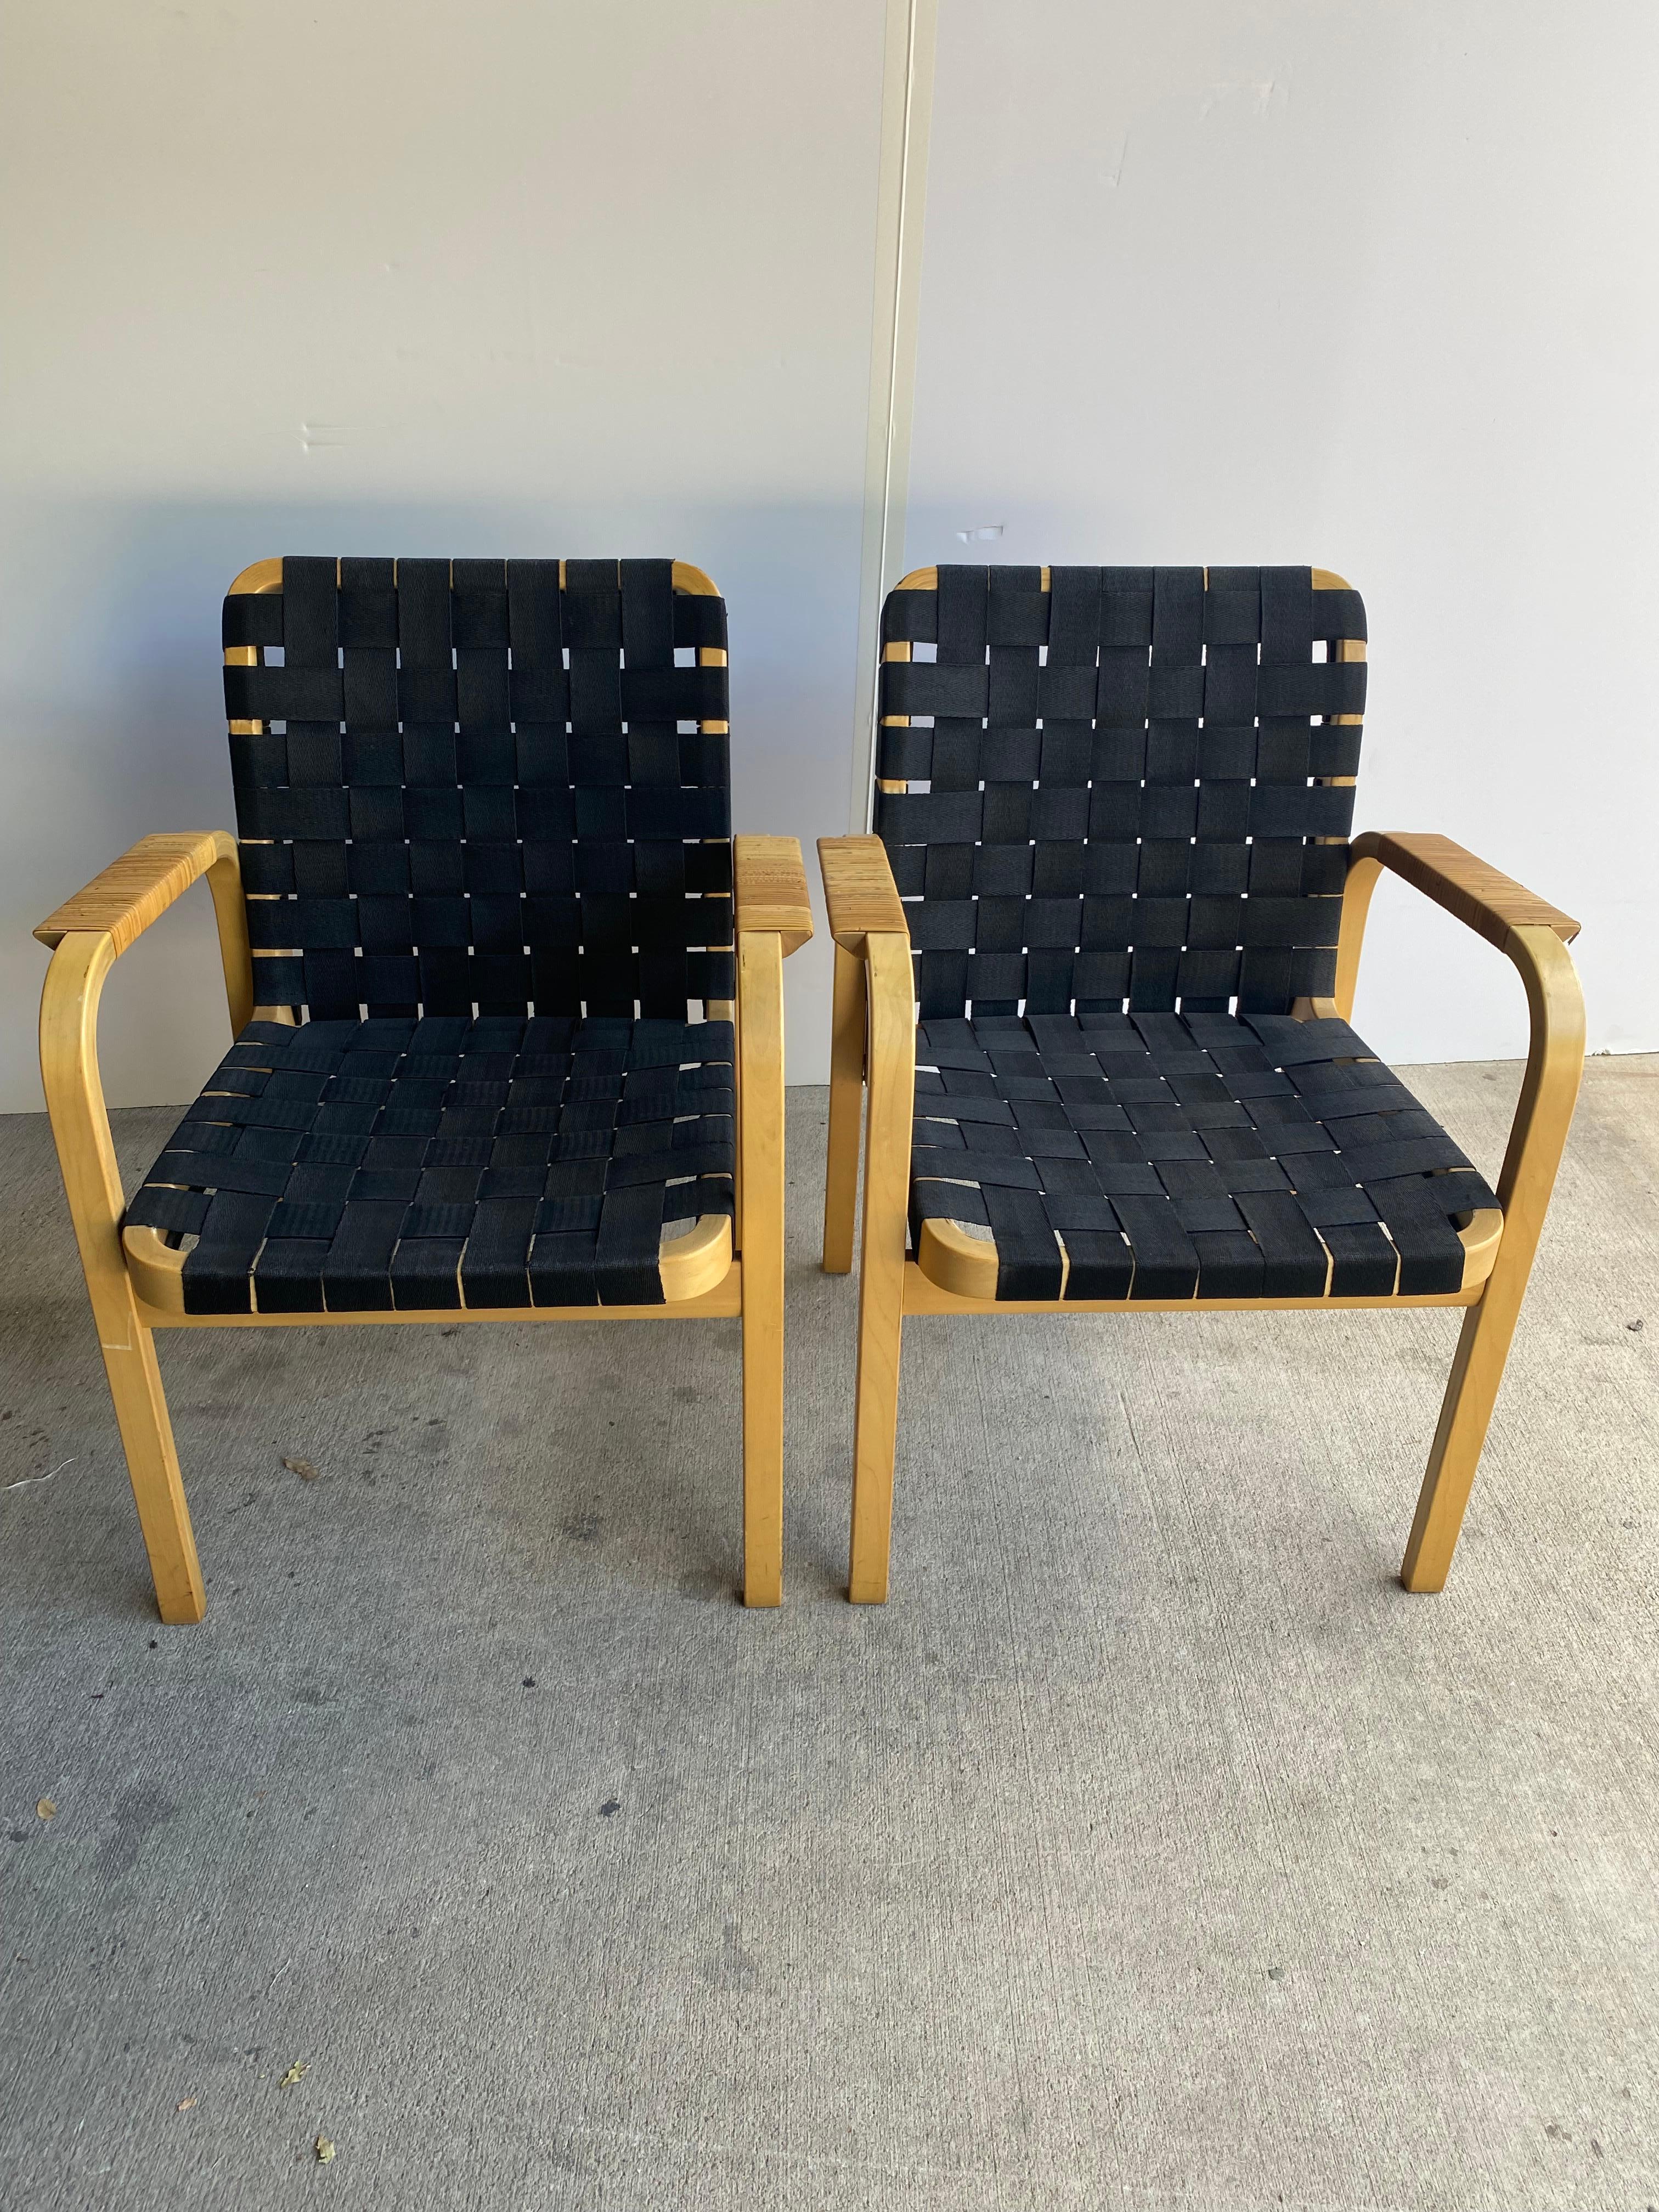 Alvar Aalto Armchairs with Black Straps, Finland, 1960's For Sale 2